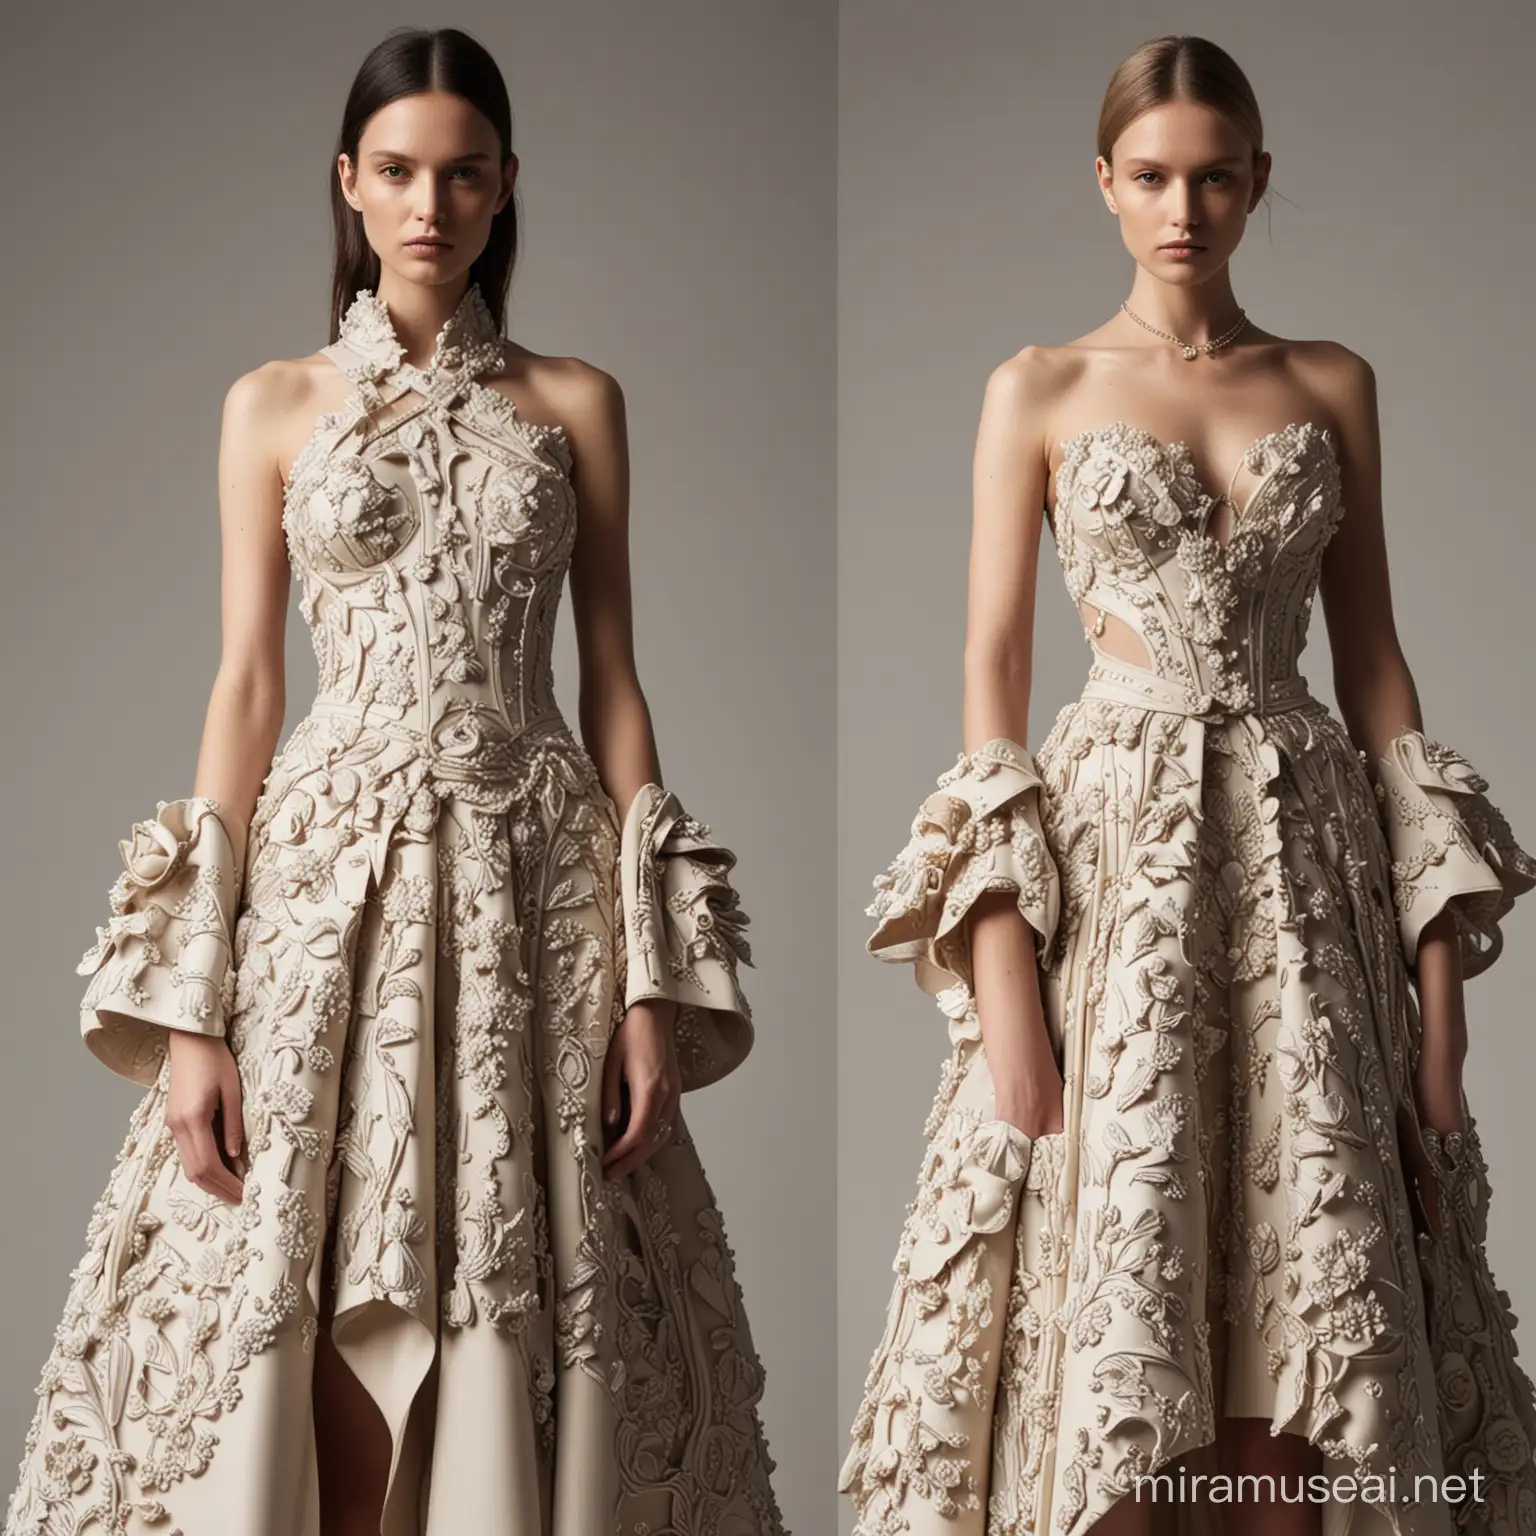 A collaboration between Gaurav gupta and alexander mcqueen, show products that embrace aesthetic of both the designers